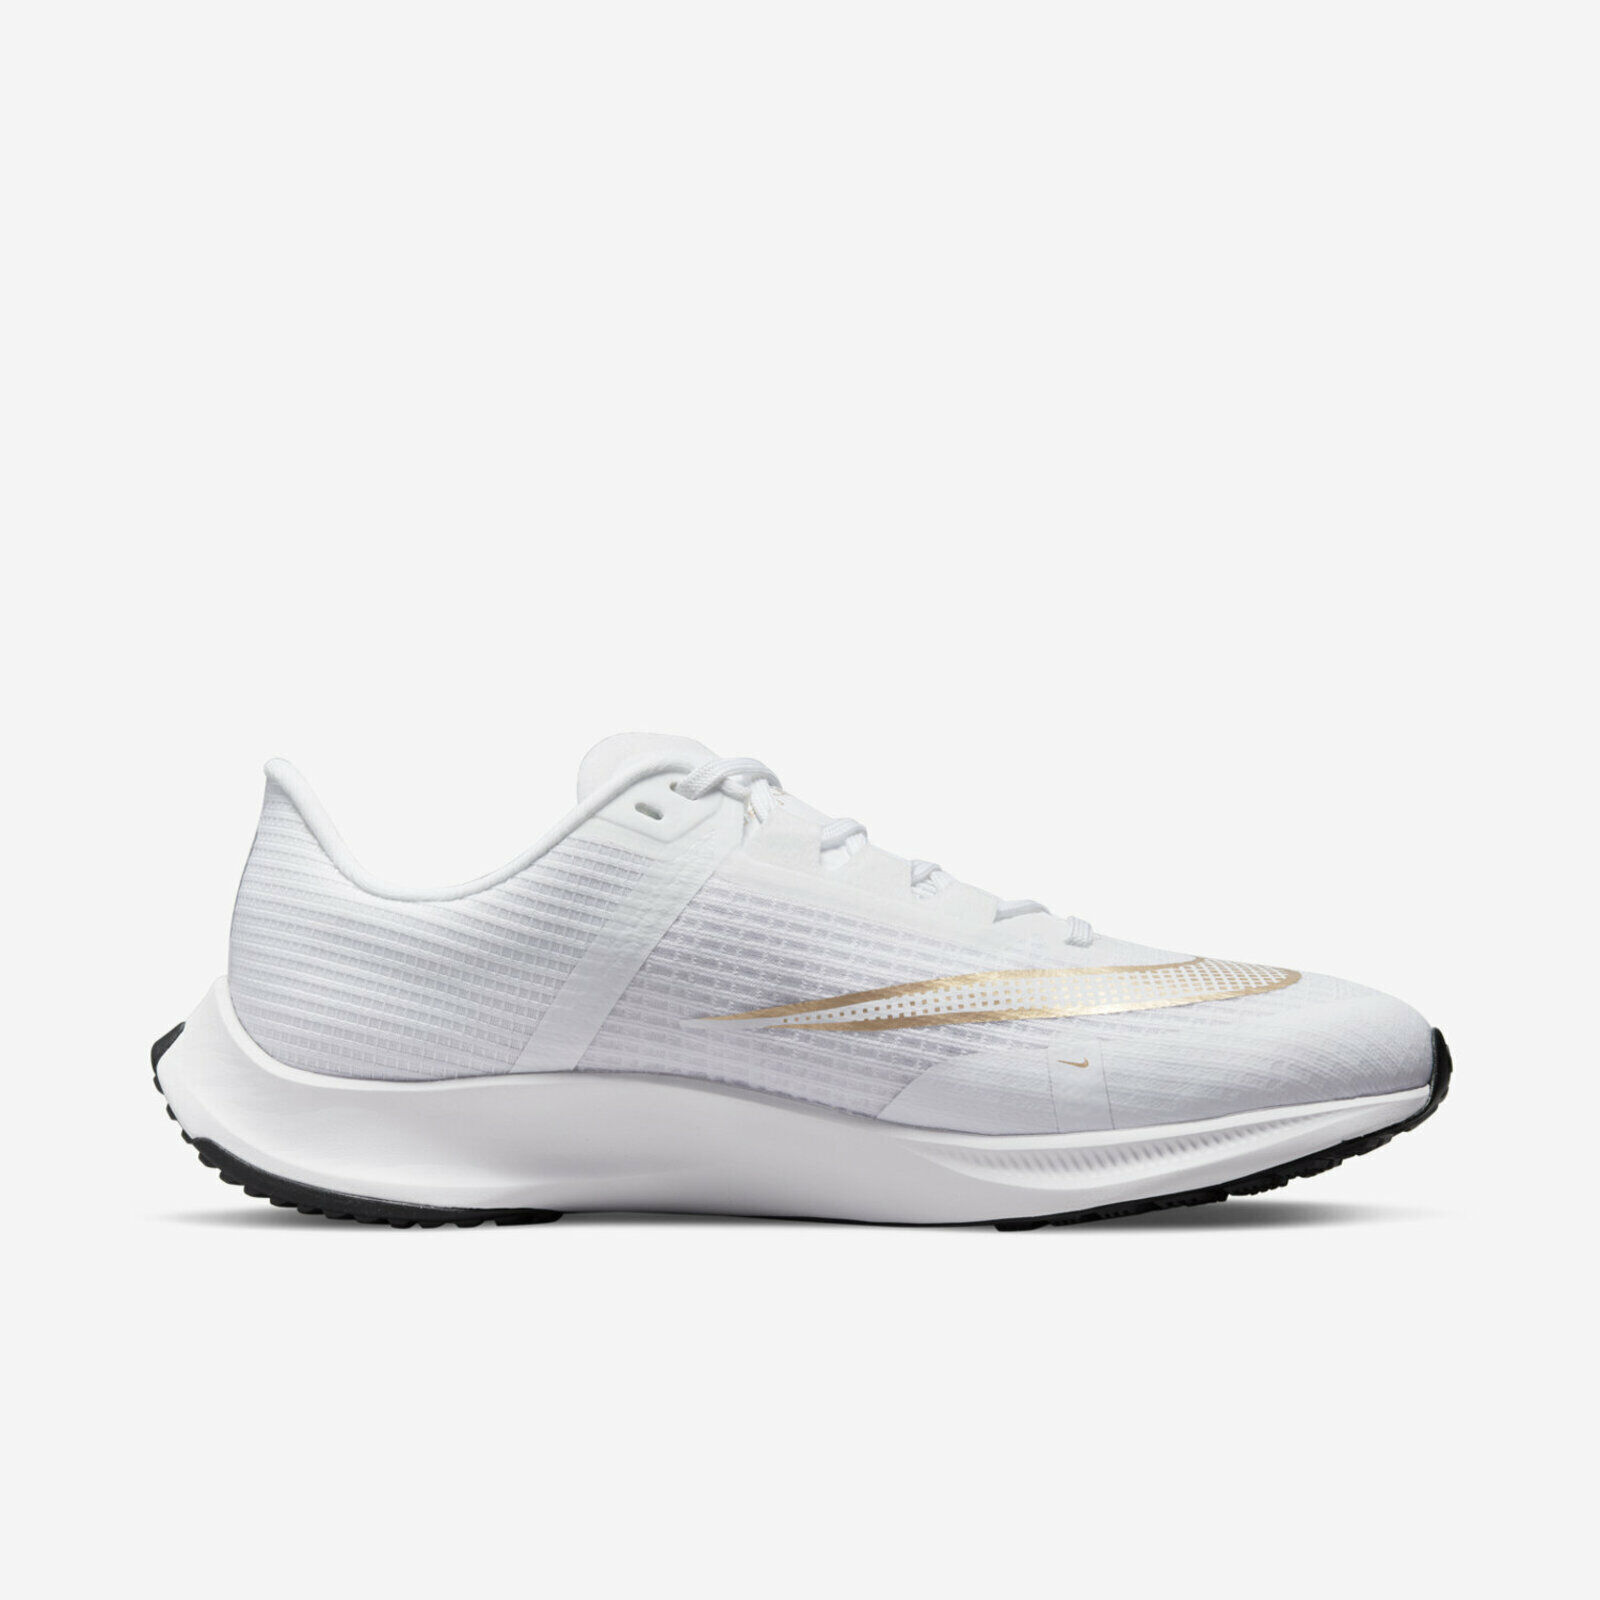 Nike Air Zoom Rival Fly 3 [CT2405-100] Men Running Shoes White/Black-Gold